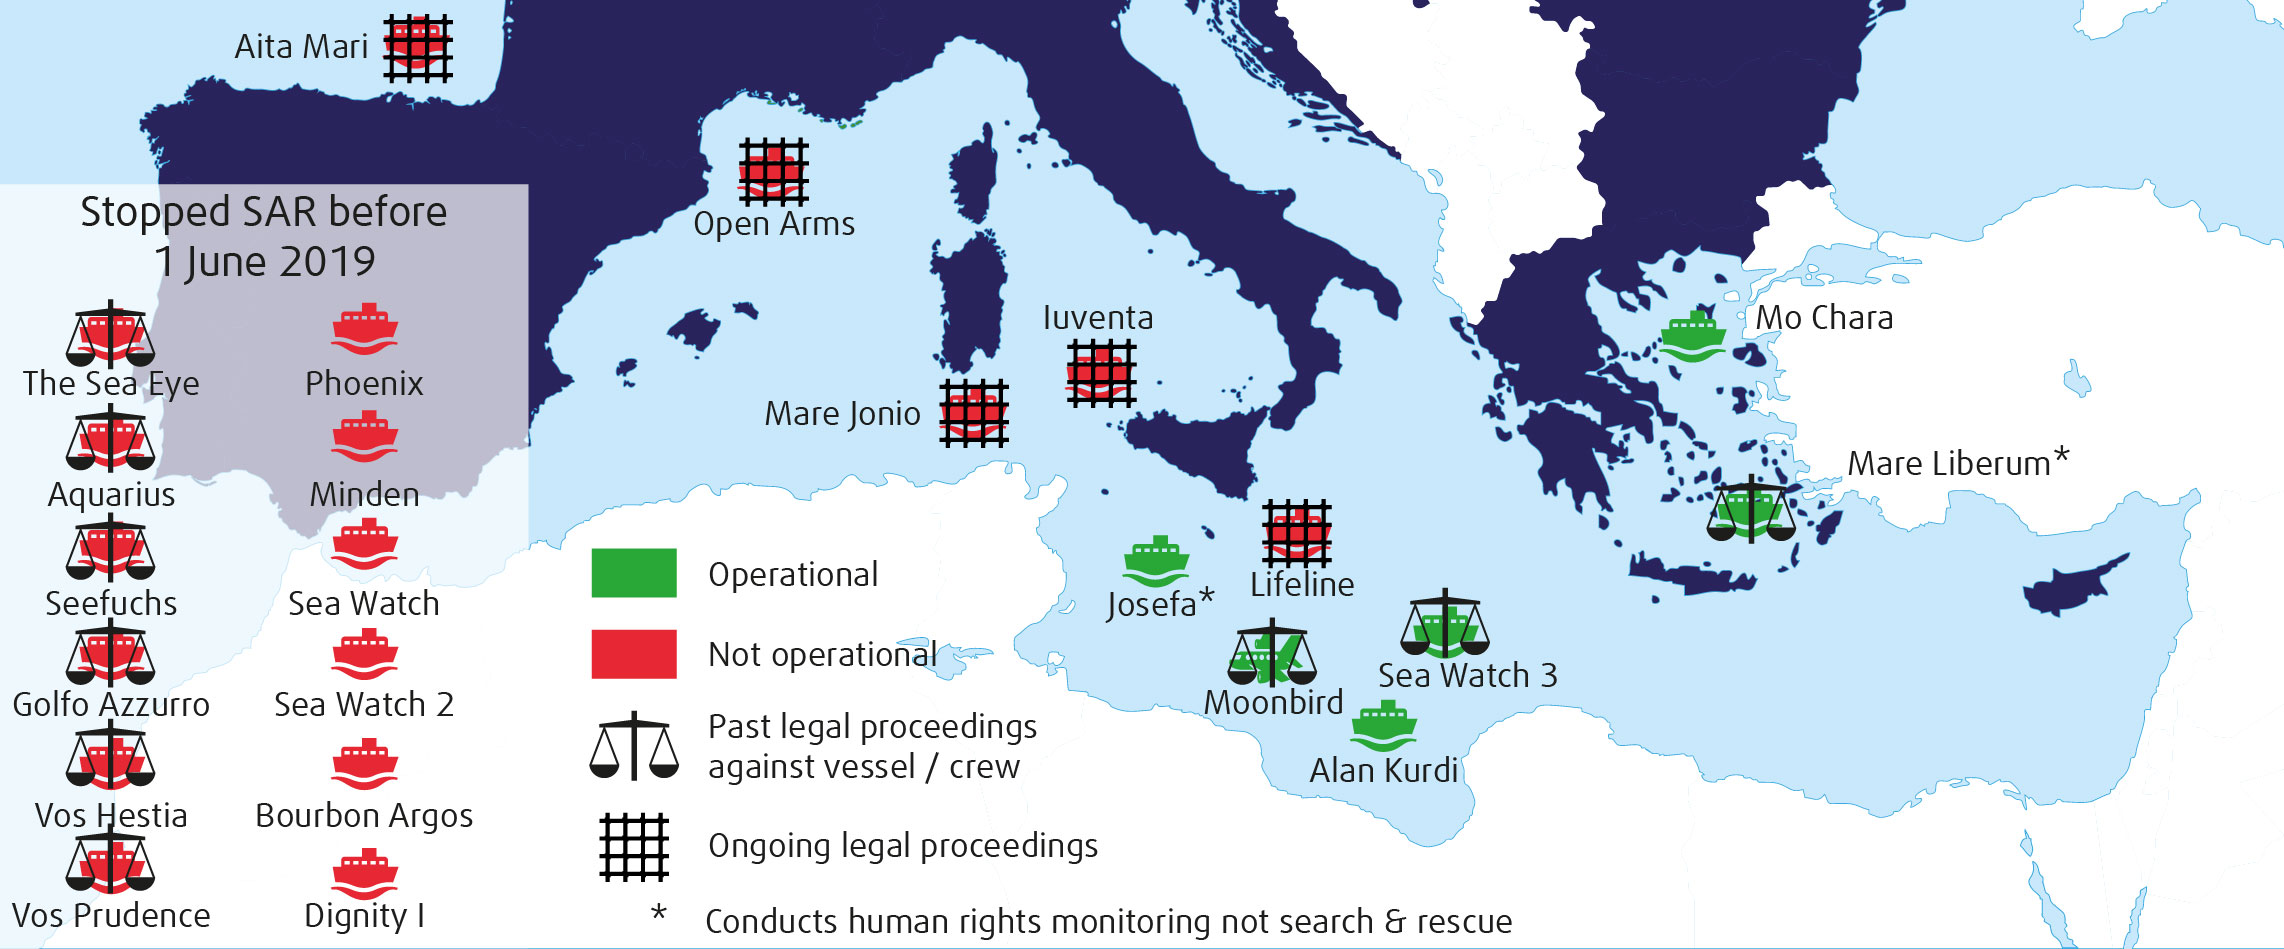 Map showing NGO ships involved in SAR operations in the Mediterranean Sea between 2016-1 June 2019